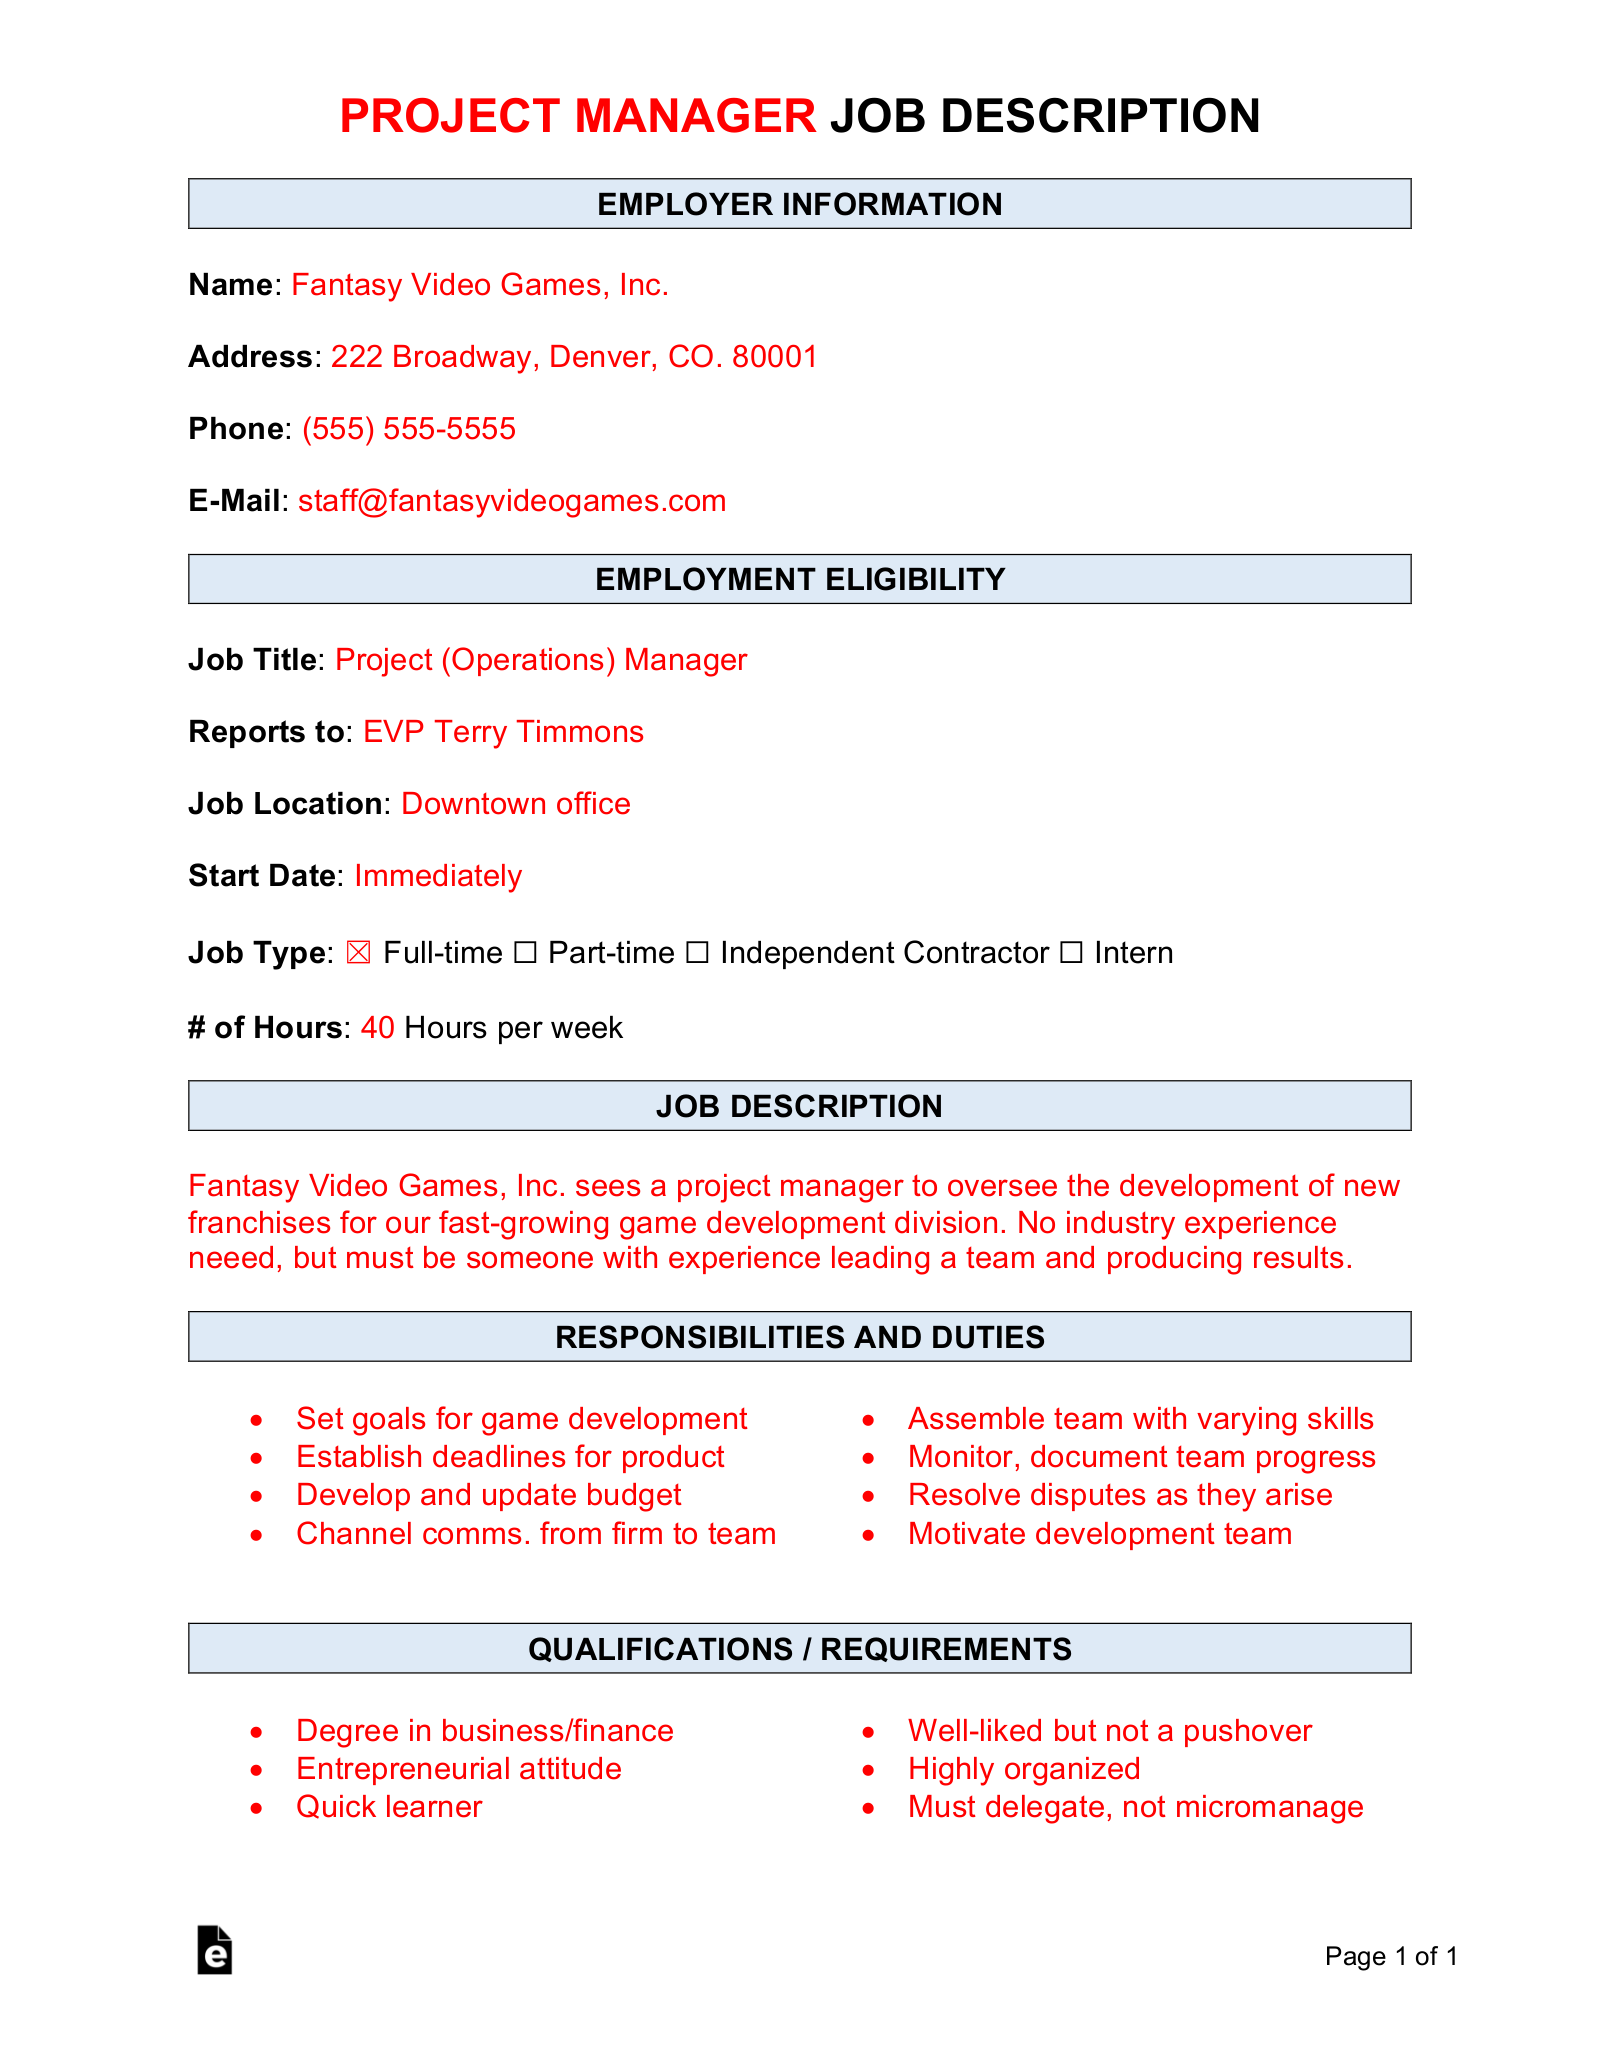 Project (Operations) Manager Job Description Template | Sample